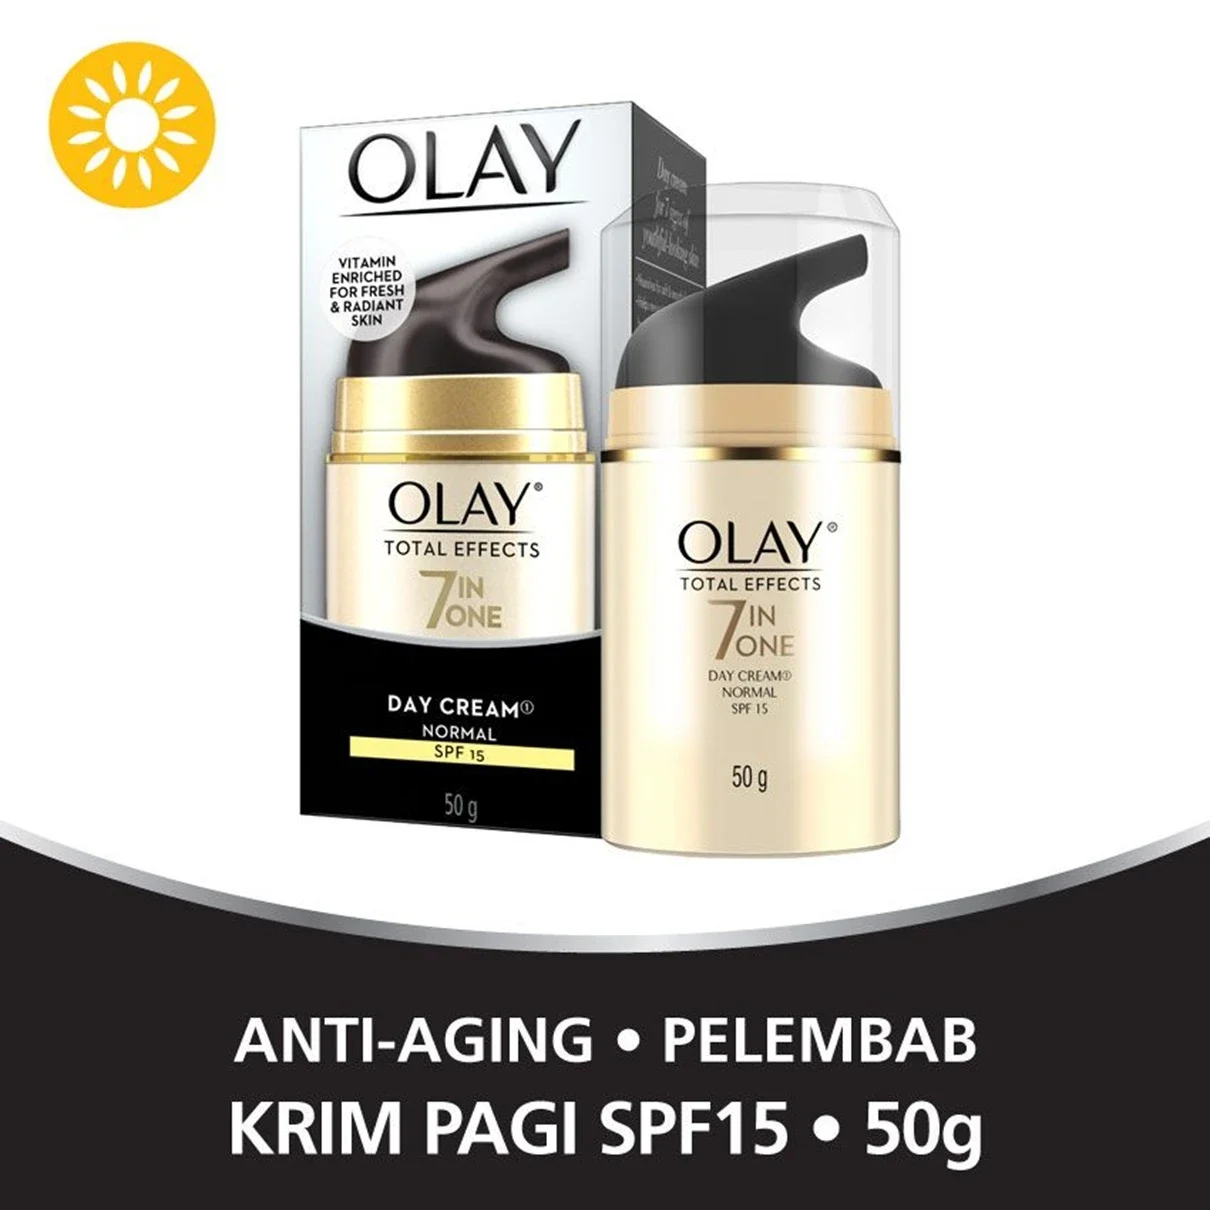  Olay Total Effects 7 in One Day Cream Normal
